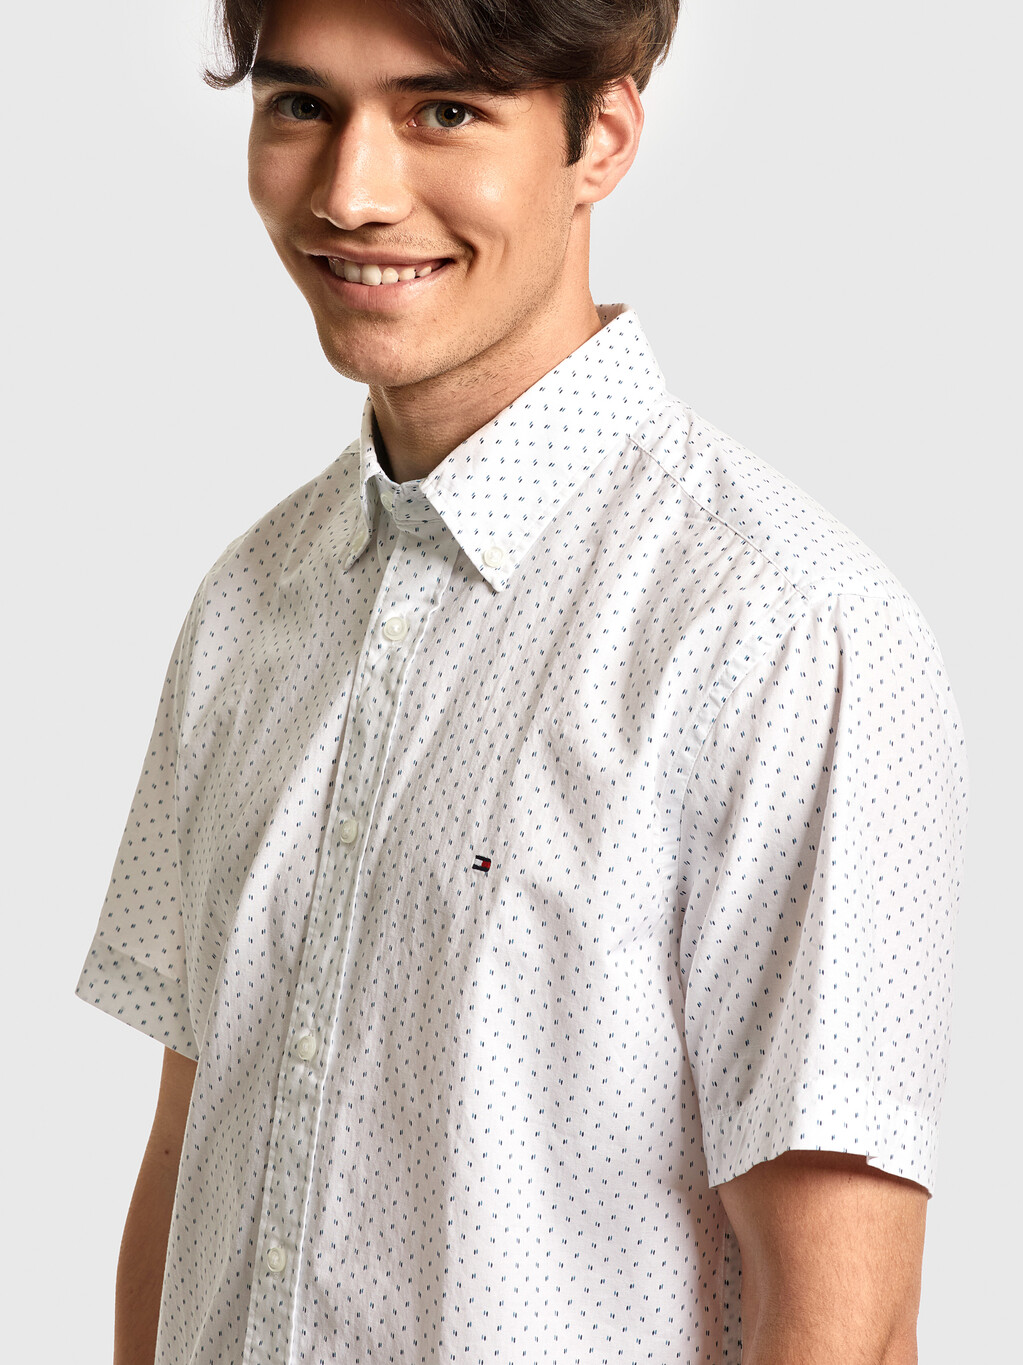 Buy MICRO PRINT SHORT SLEEVE SHIRT in color WHITE